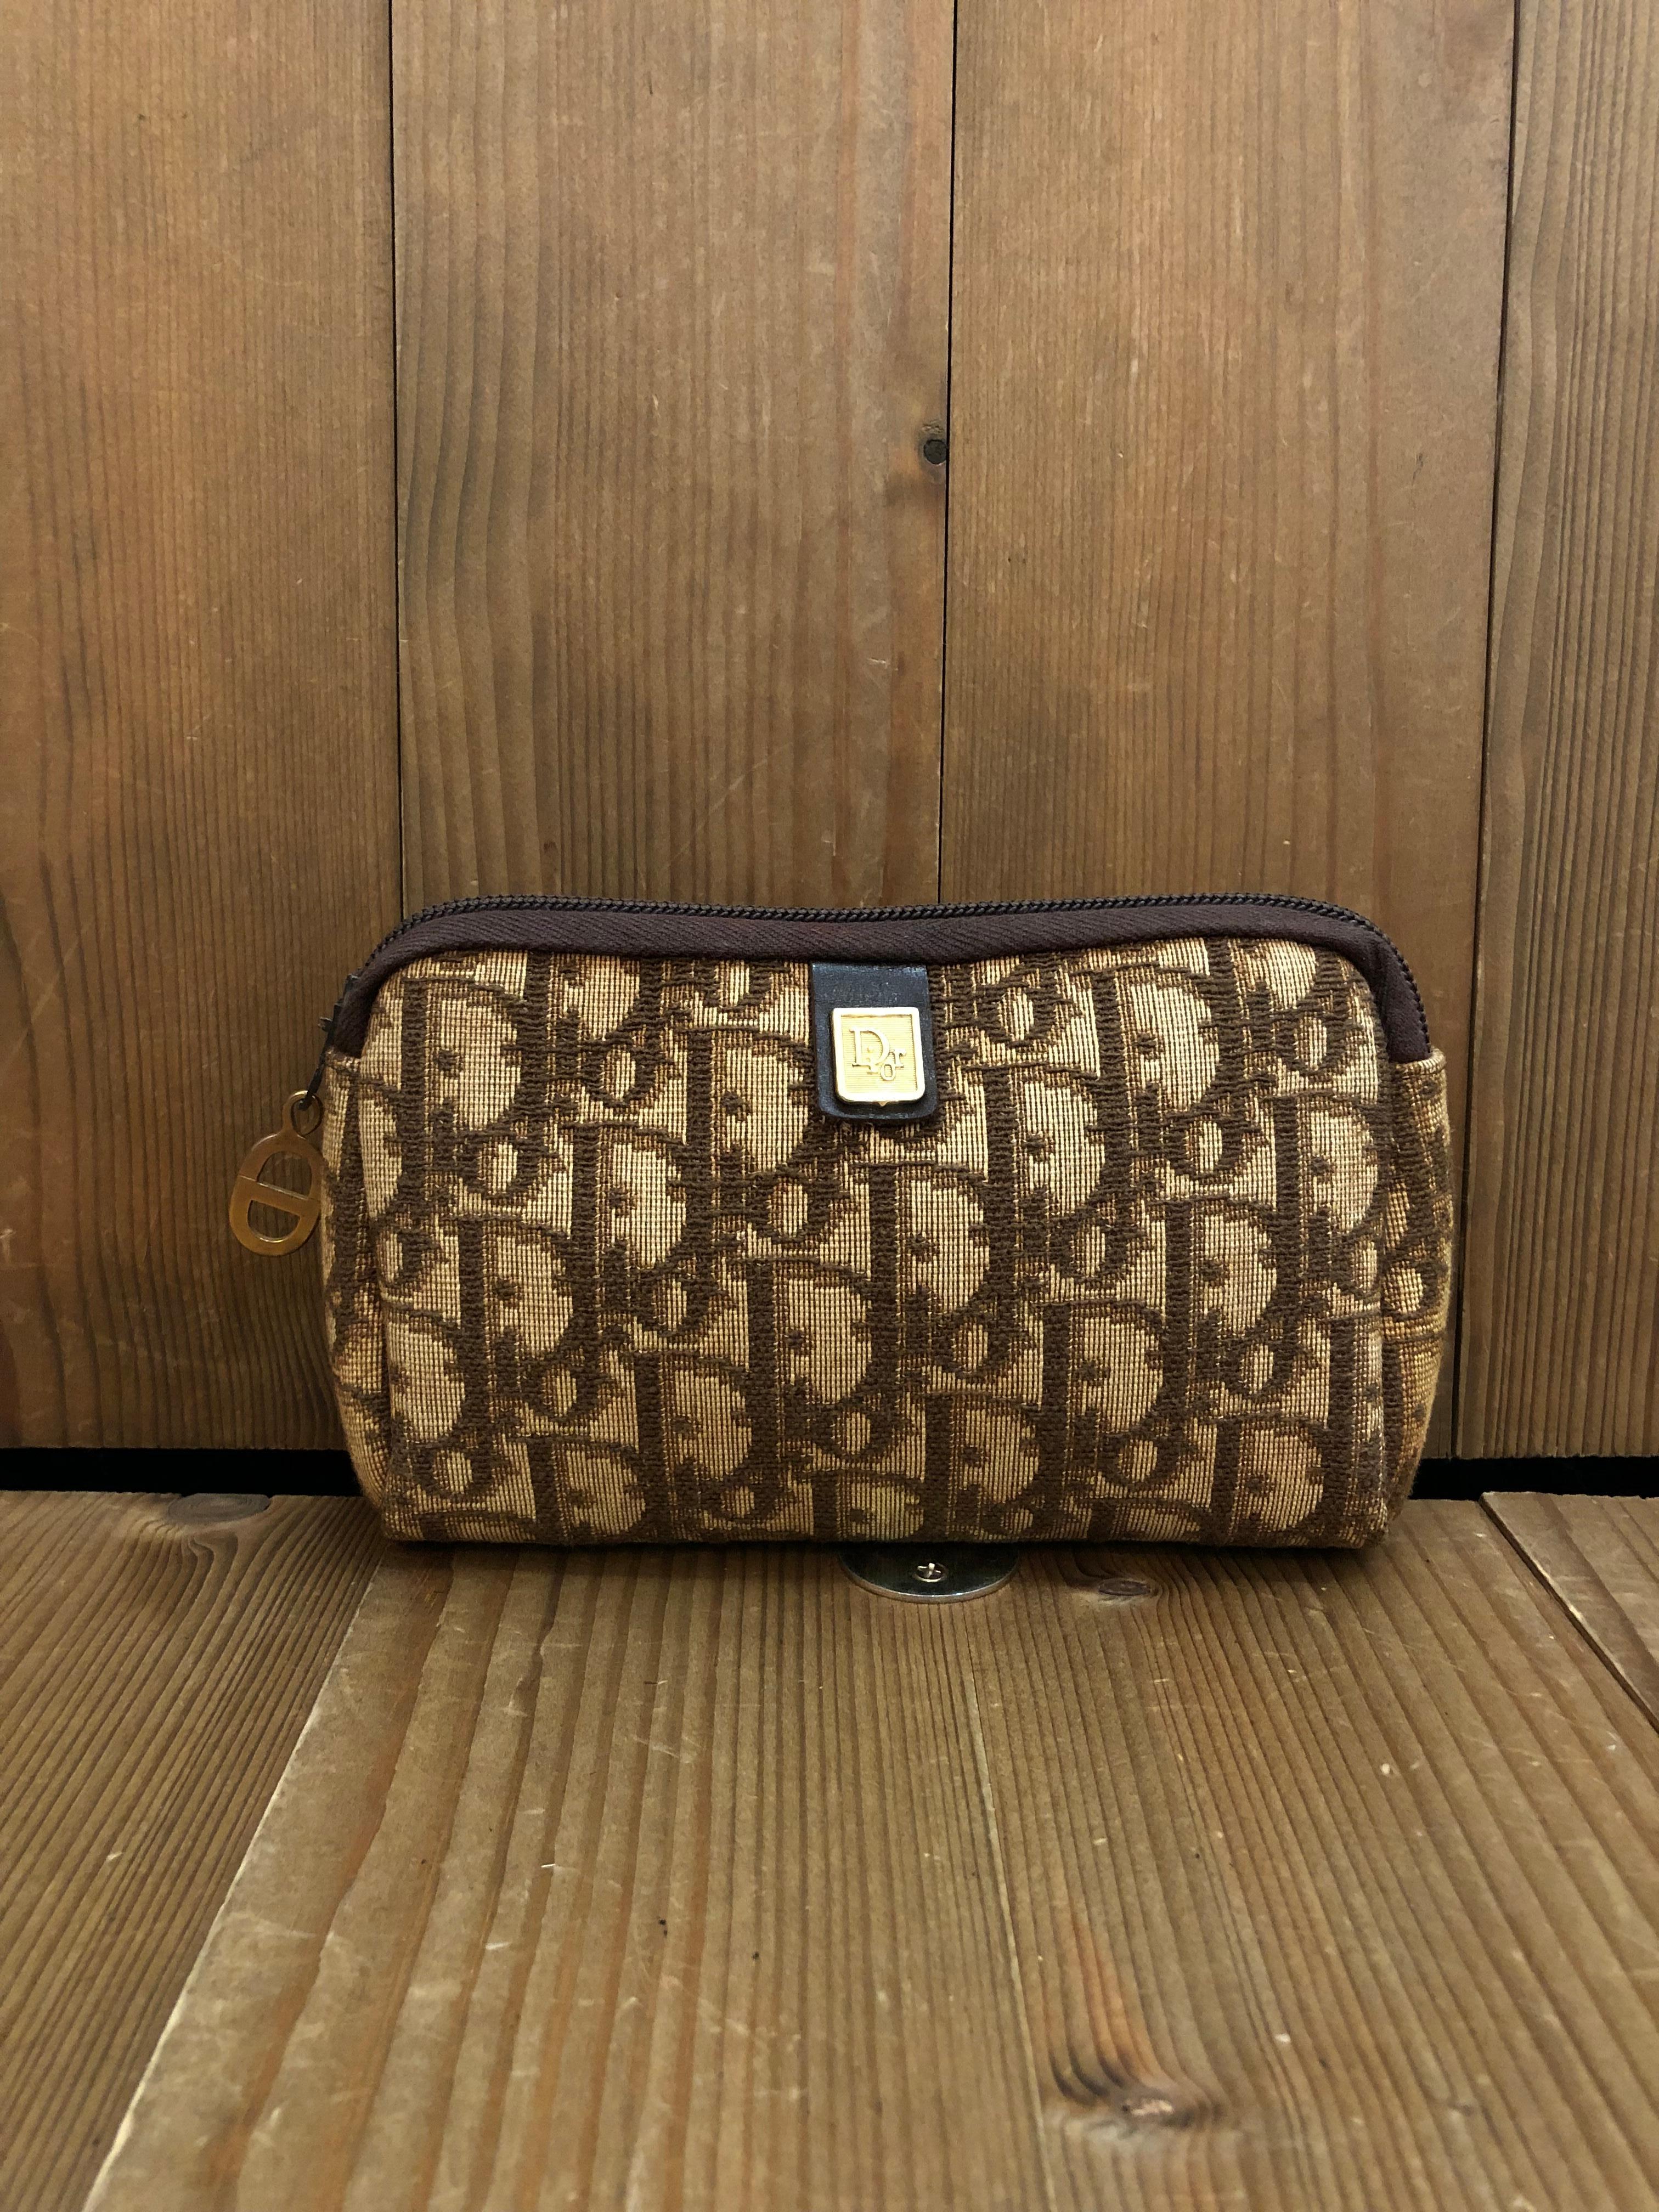 This Vintage CHRISTIAN DIOR mini vanity pouch is crafted of Dior signature Trotter jacquard in brown featuring gold toned hardware. Top zipper closure opens to a coated interior in brown. Made in France. Measures approximately 6.25 x 4 x 1.5 inches.